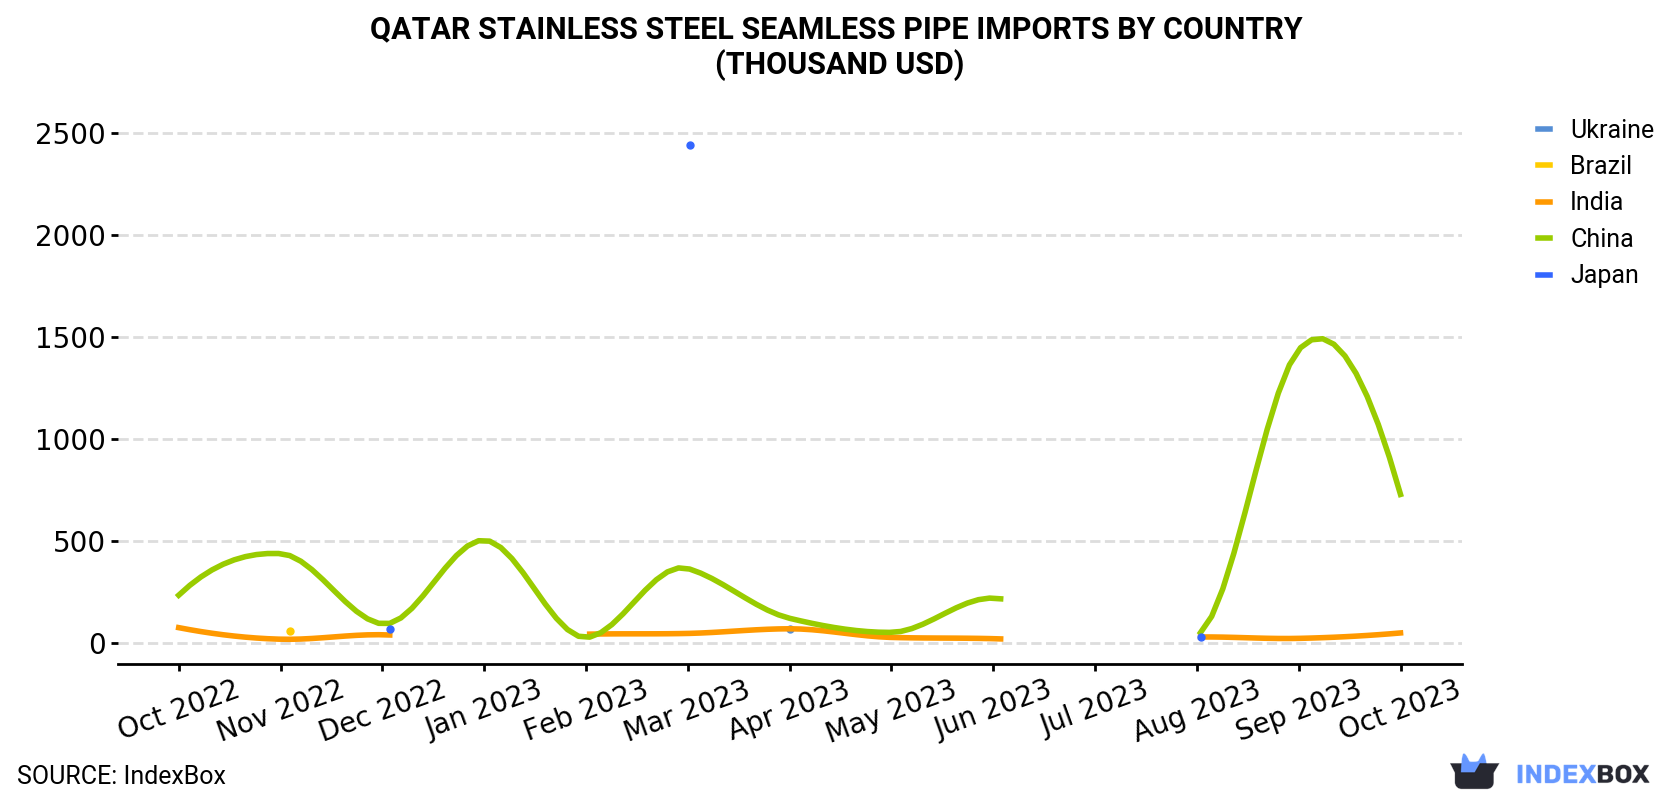 Qatar Stainless Steel Seamless Pipe Imports By Country (Thousand USD)